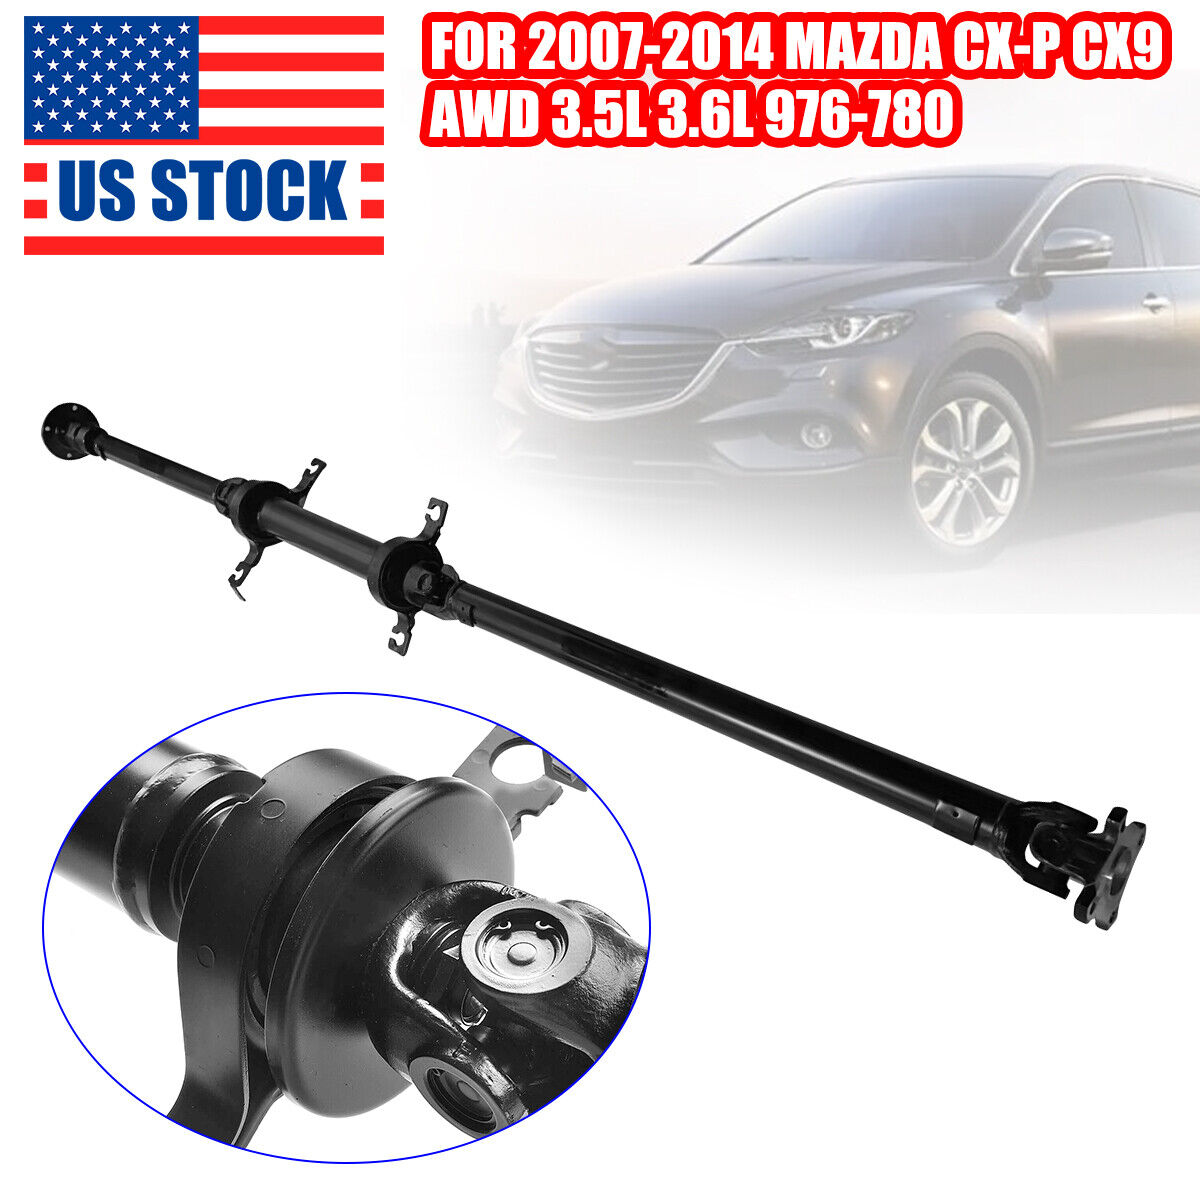 Rear Driveshaft Prop Shaft Assembly For 07-14 Mazda CX-9 Touring AWD 3.5L 3.7L